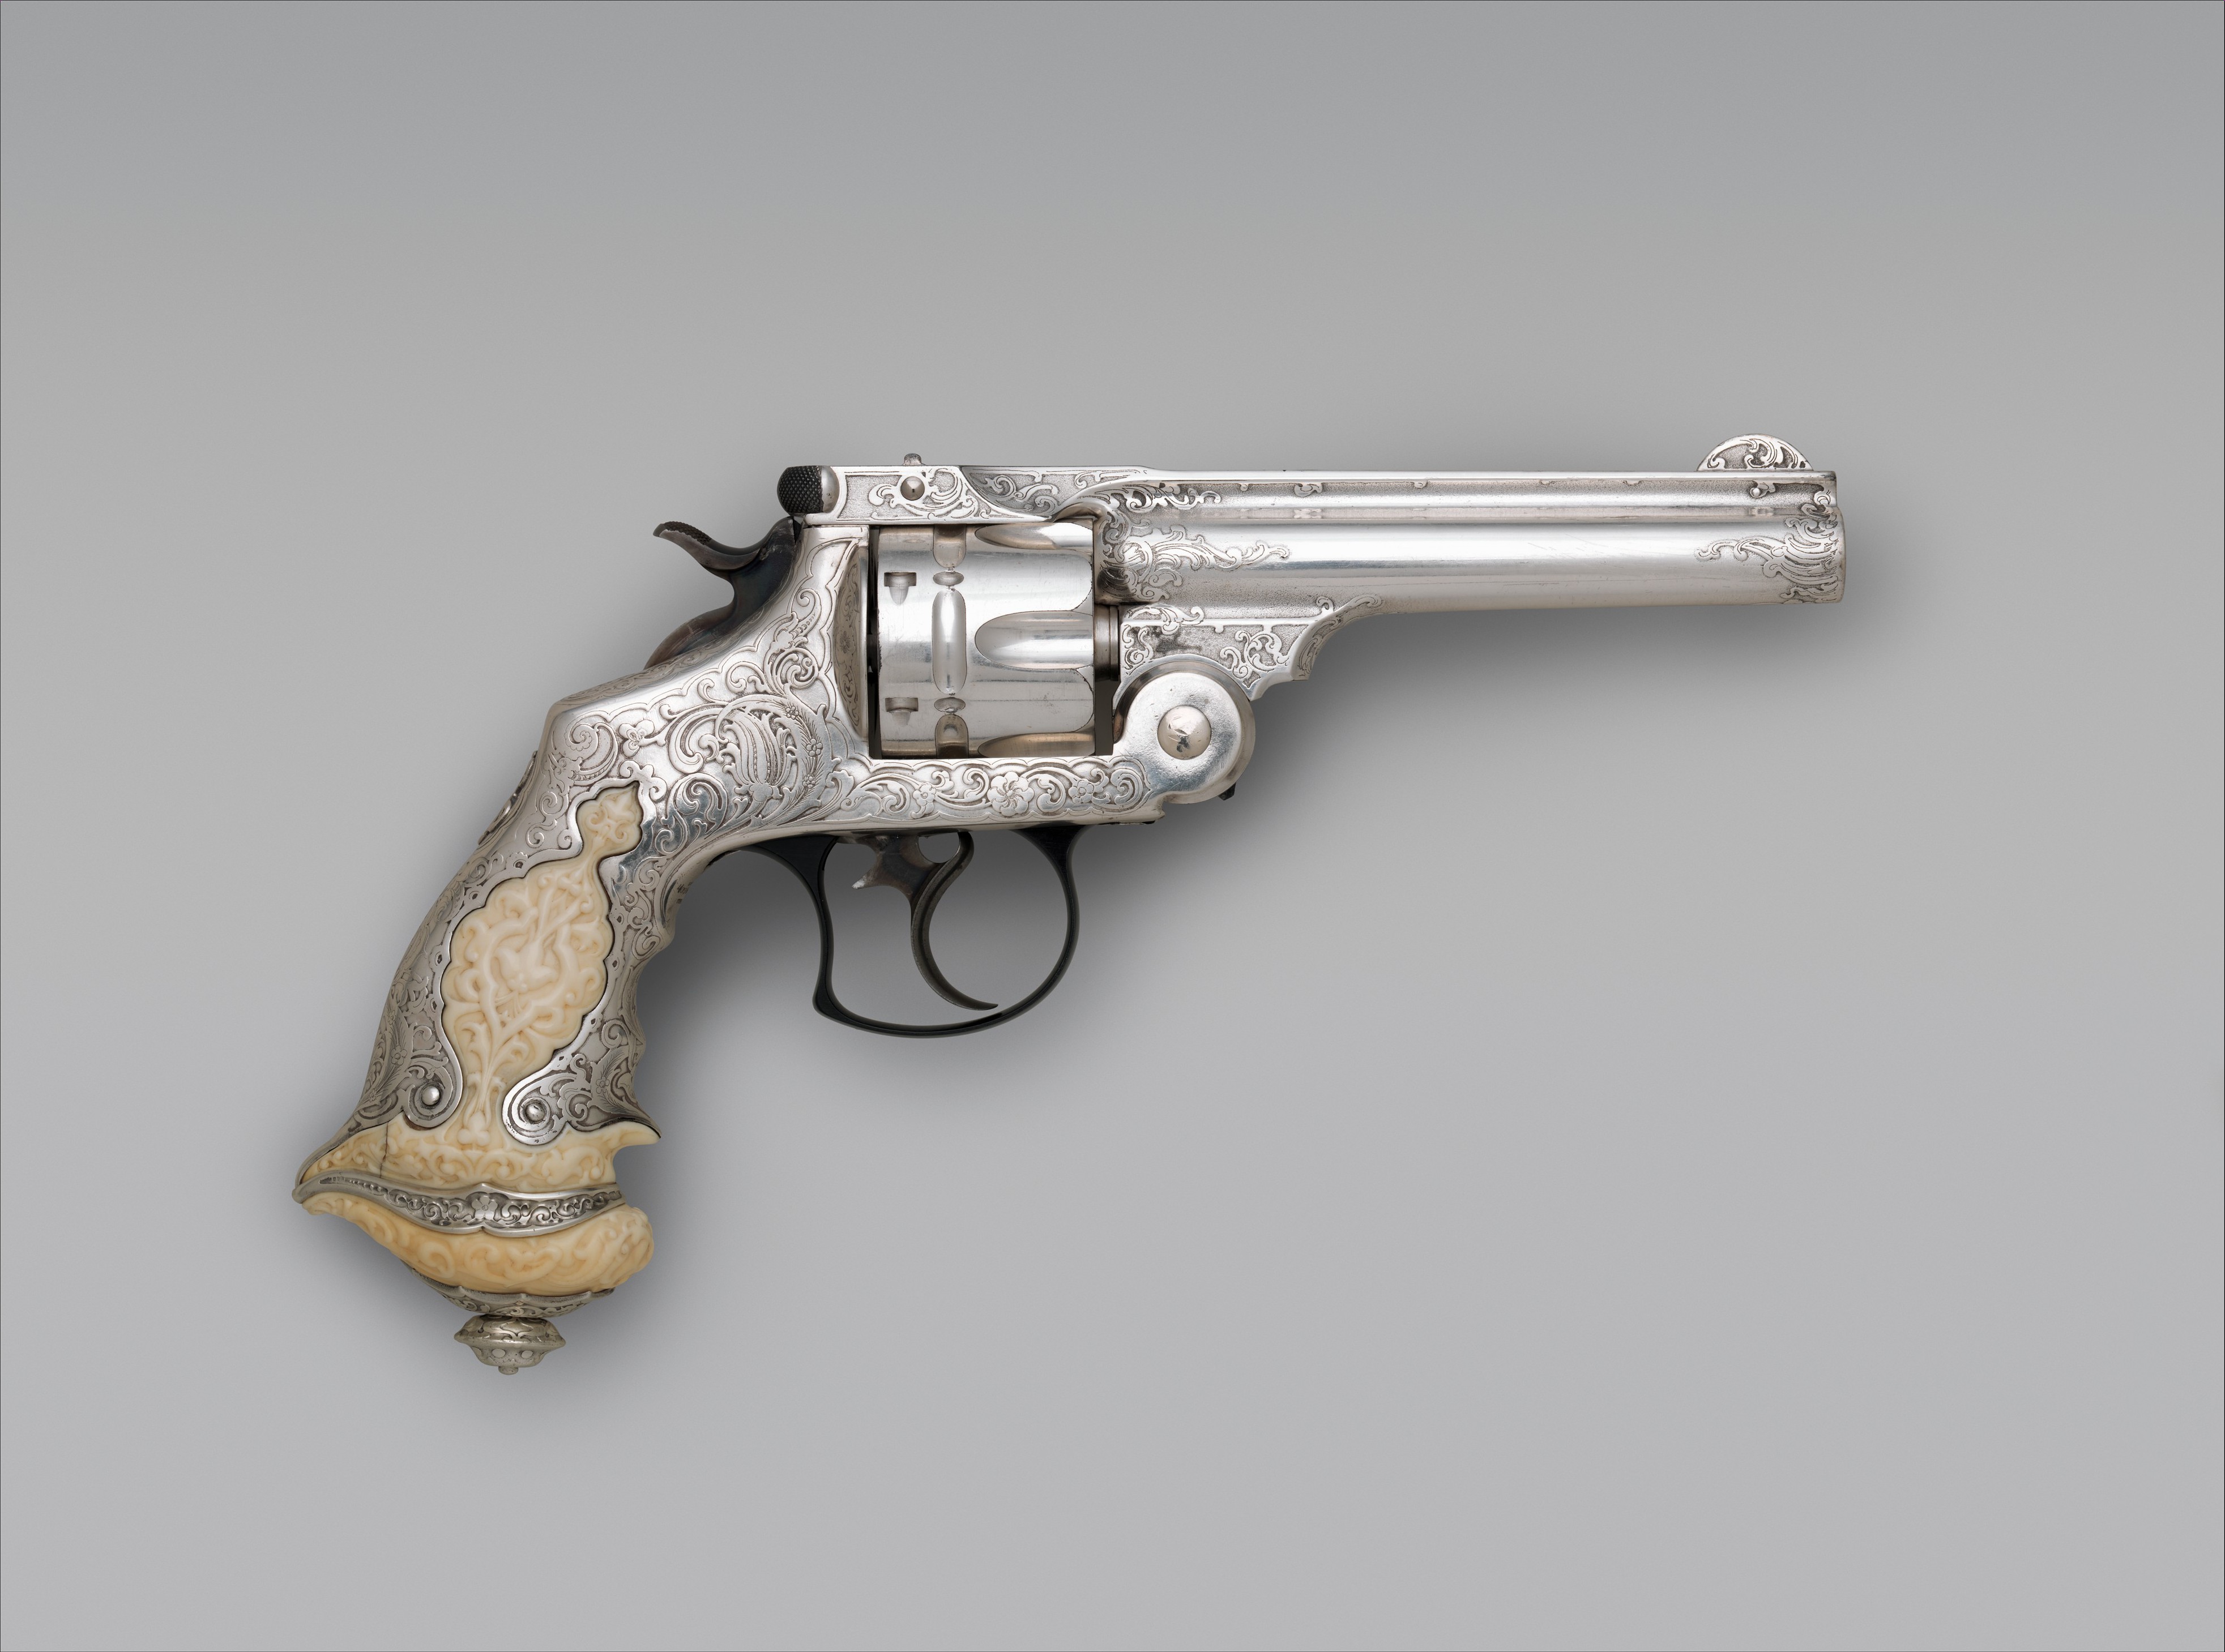 Smith & Wesson, Smith and Wesson .44 Double-Action Revolver for George Jay  Gould (1864–1923), serial no. 23402, with Case and Cleaning Brush, American, Springfield, Massachusetts and New York